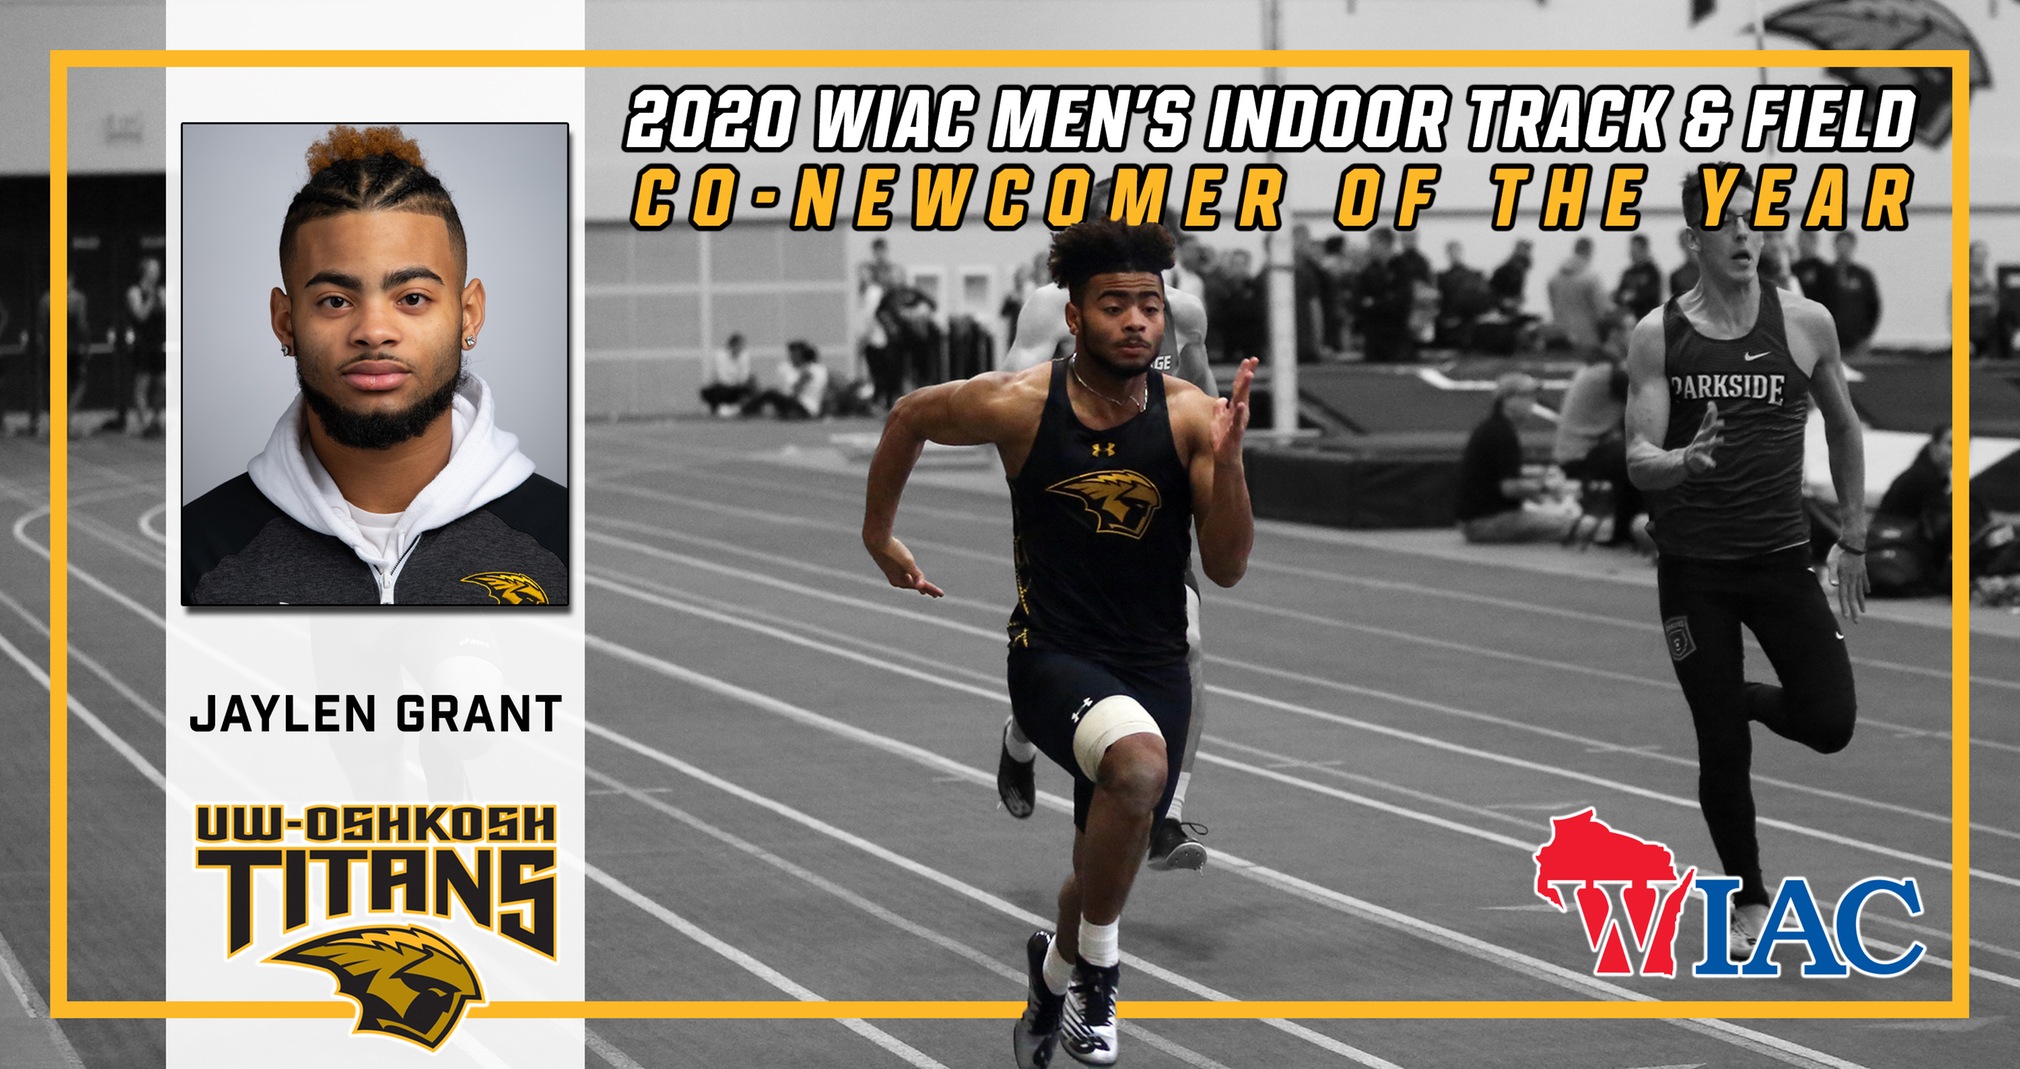 Grant Selected WIAC Track & Field Newcomer Of The Year